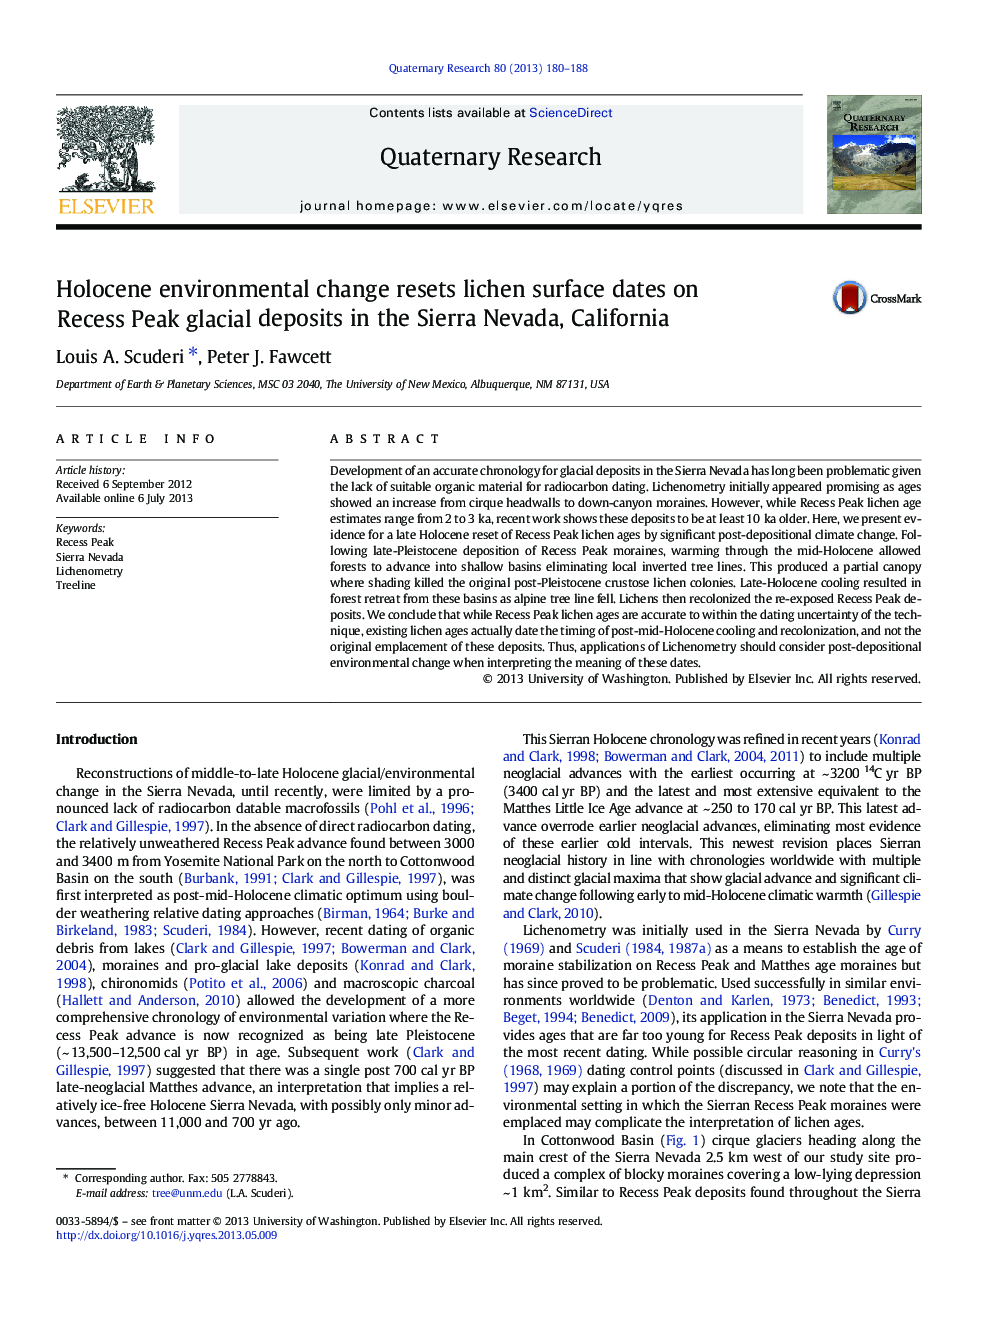 Holocene environmental change resets lichen surface dates on Recess Peak glacial deposits in the Sierra Nevada, California